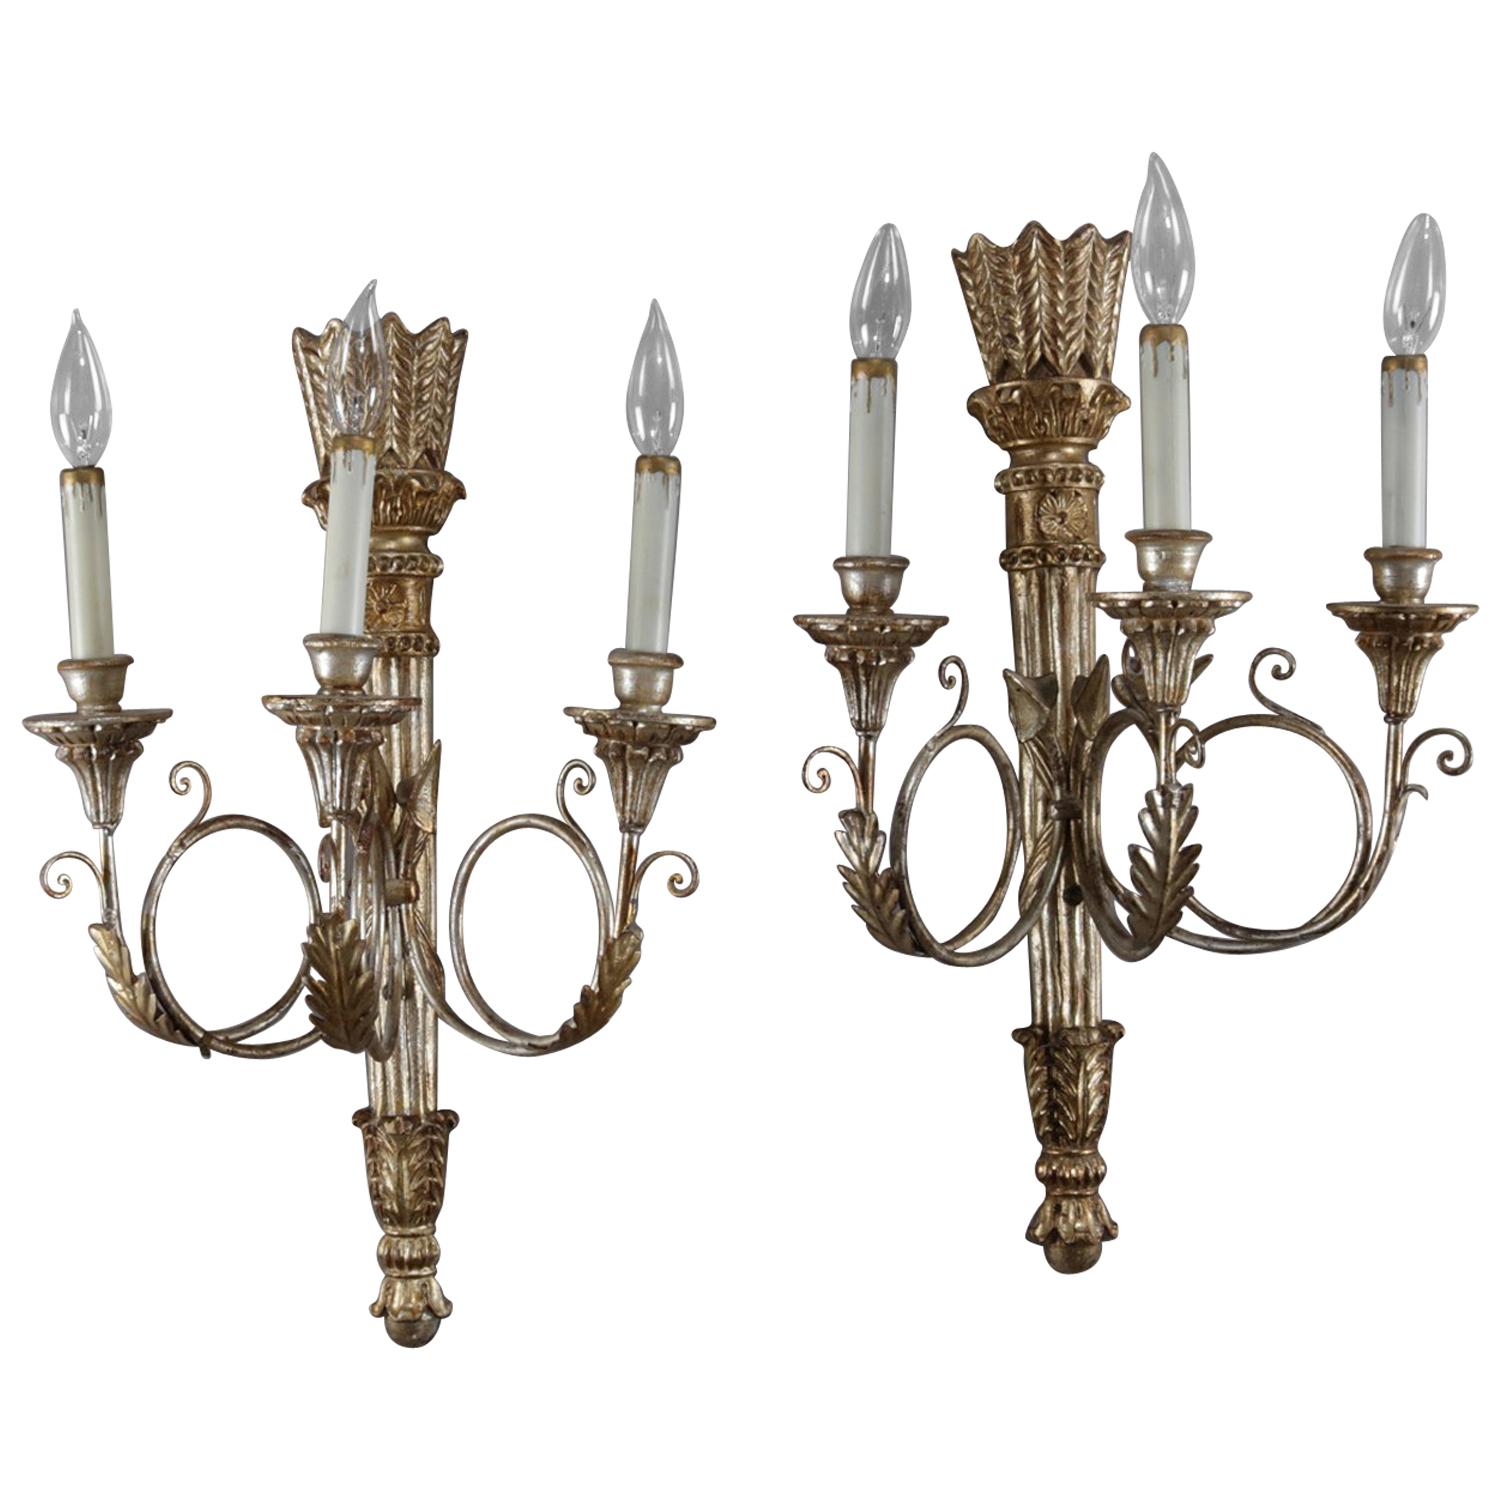 Pair of Classical French Empire Style Gilt Torchère Three-Light Wall Sconces